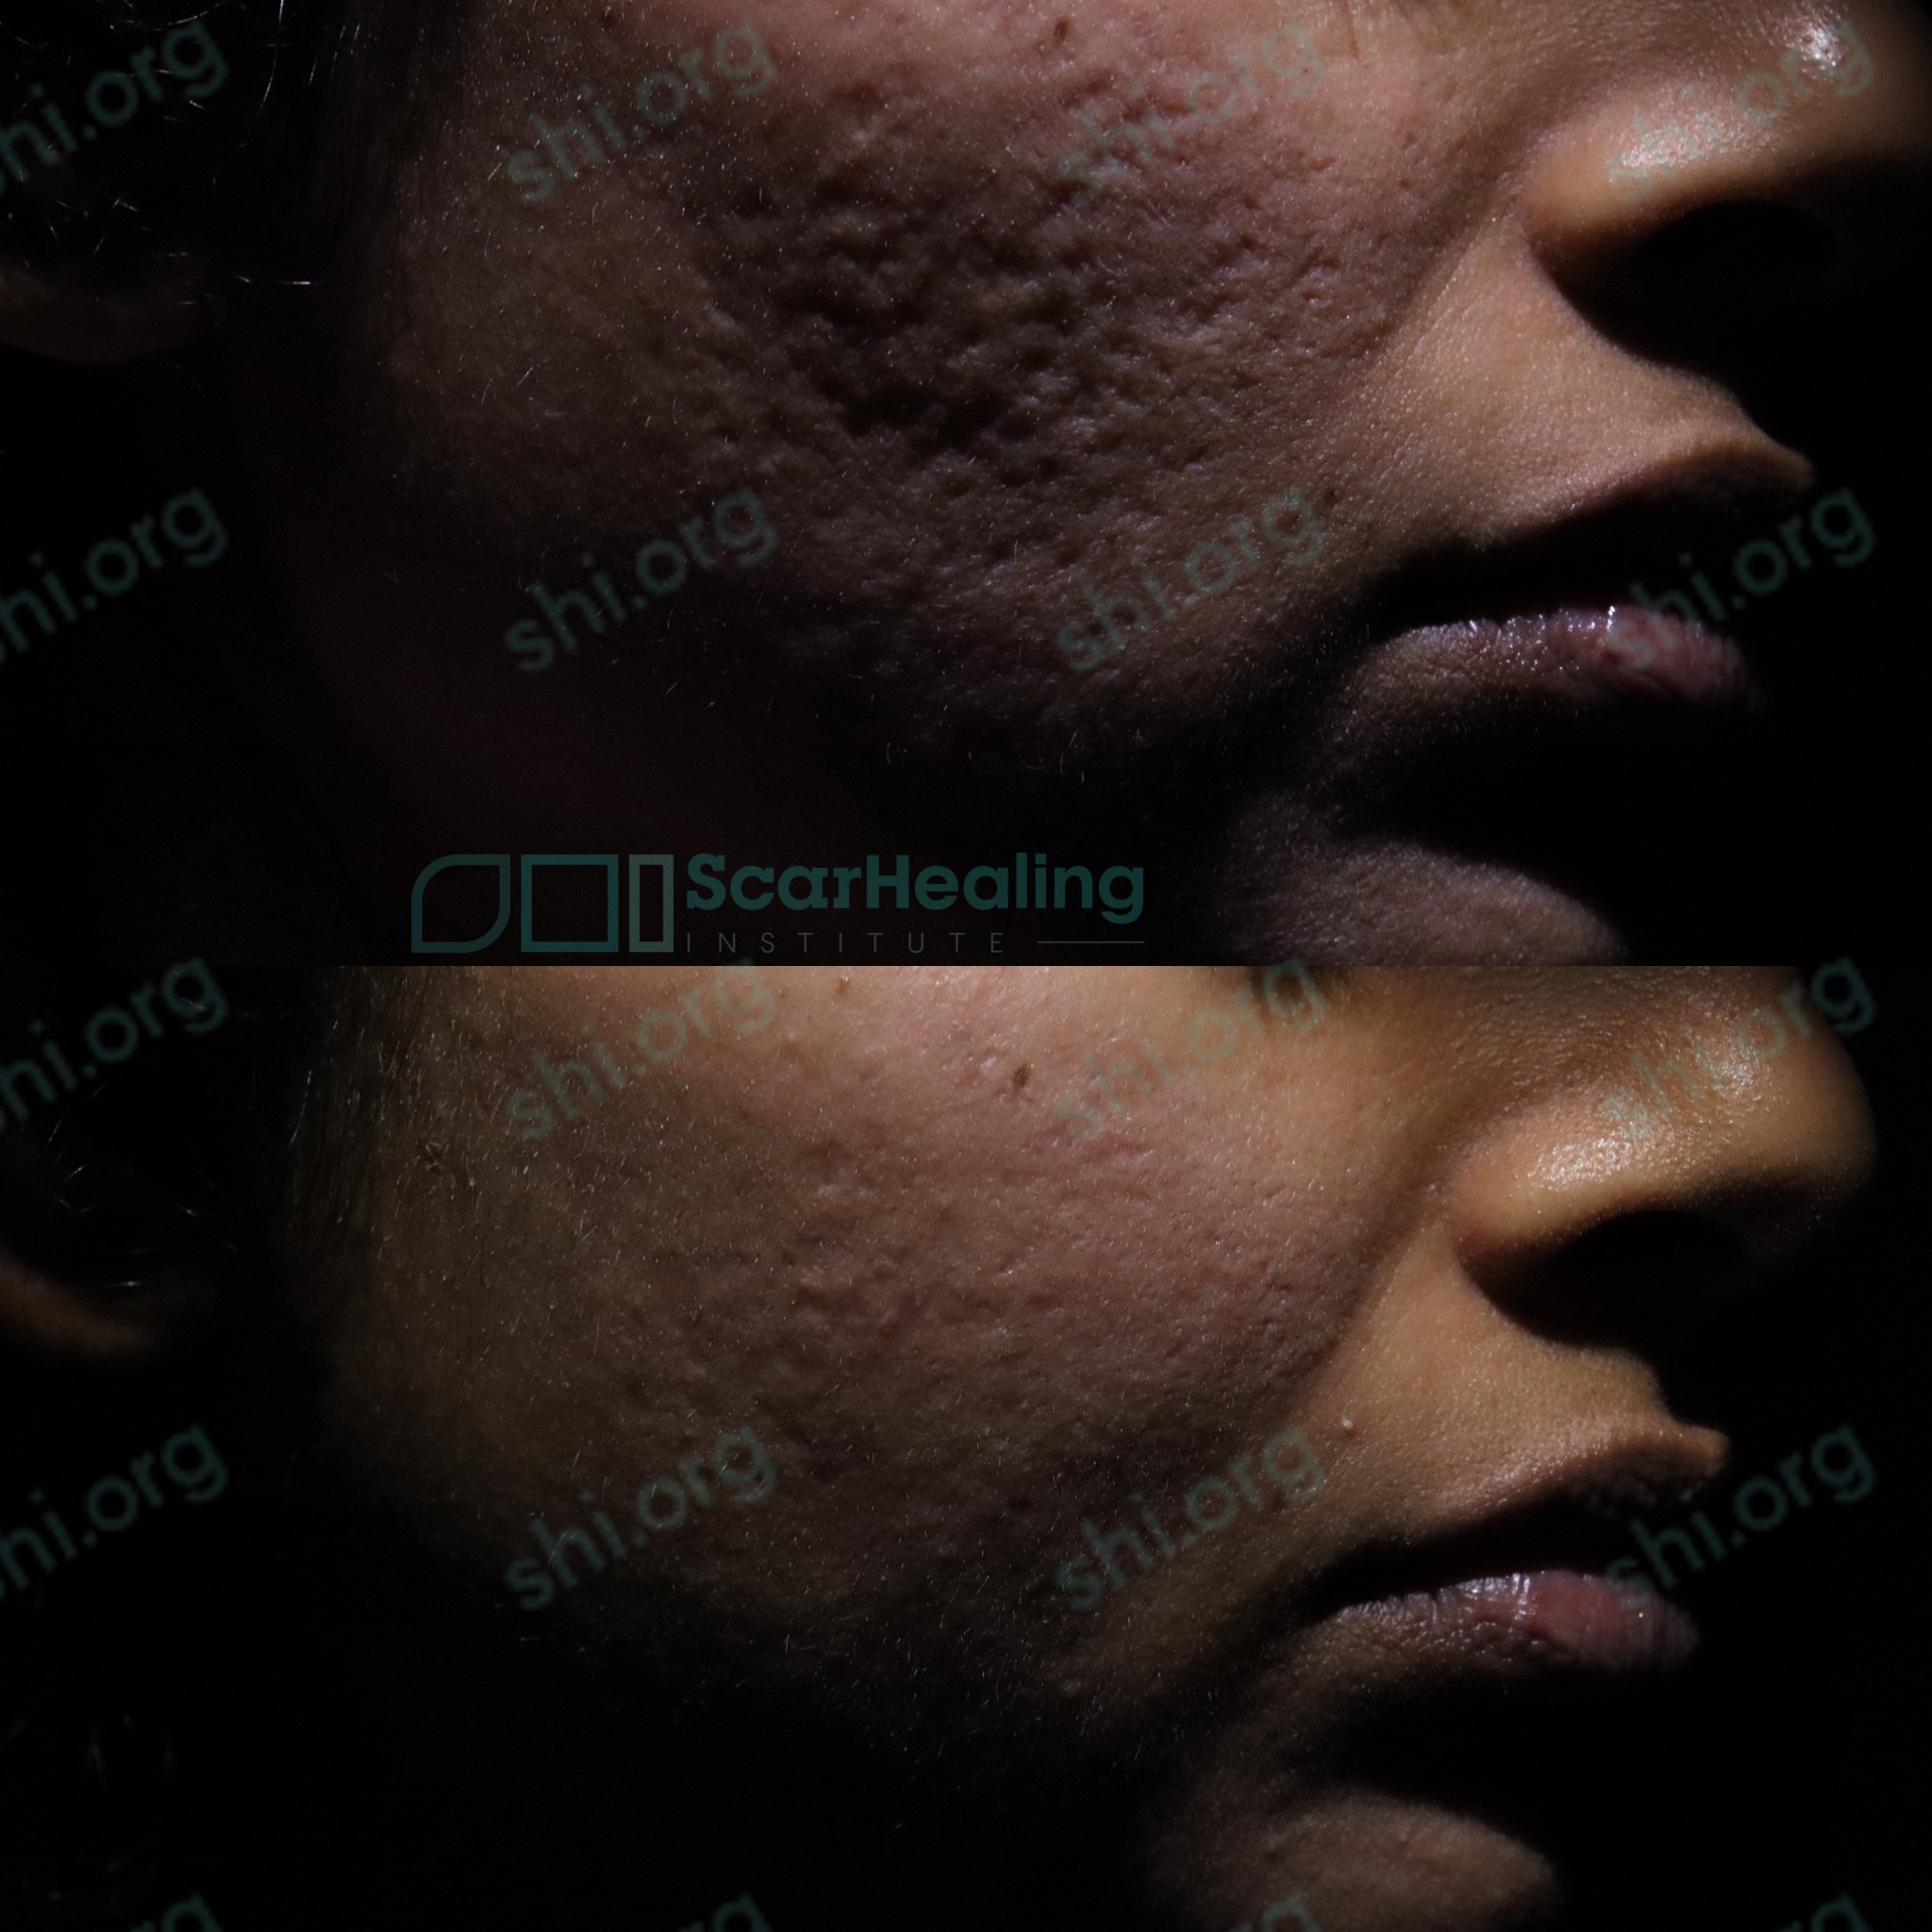 RR SHI 78 - Acne Scarring Active Acne Patient Results Scar Healing